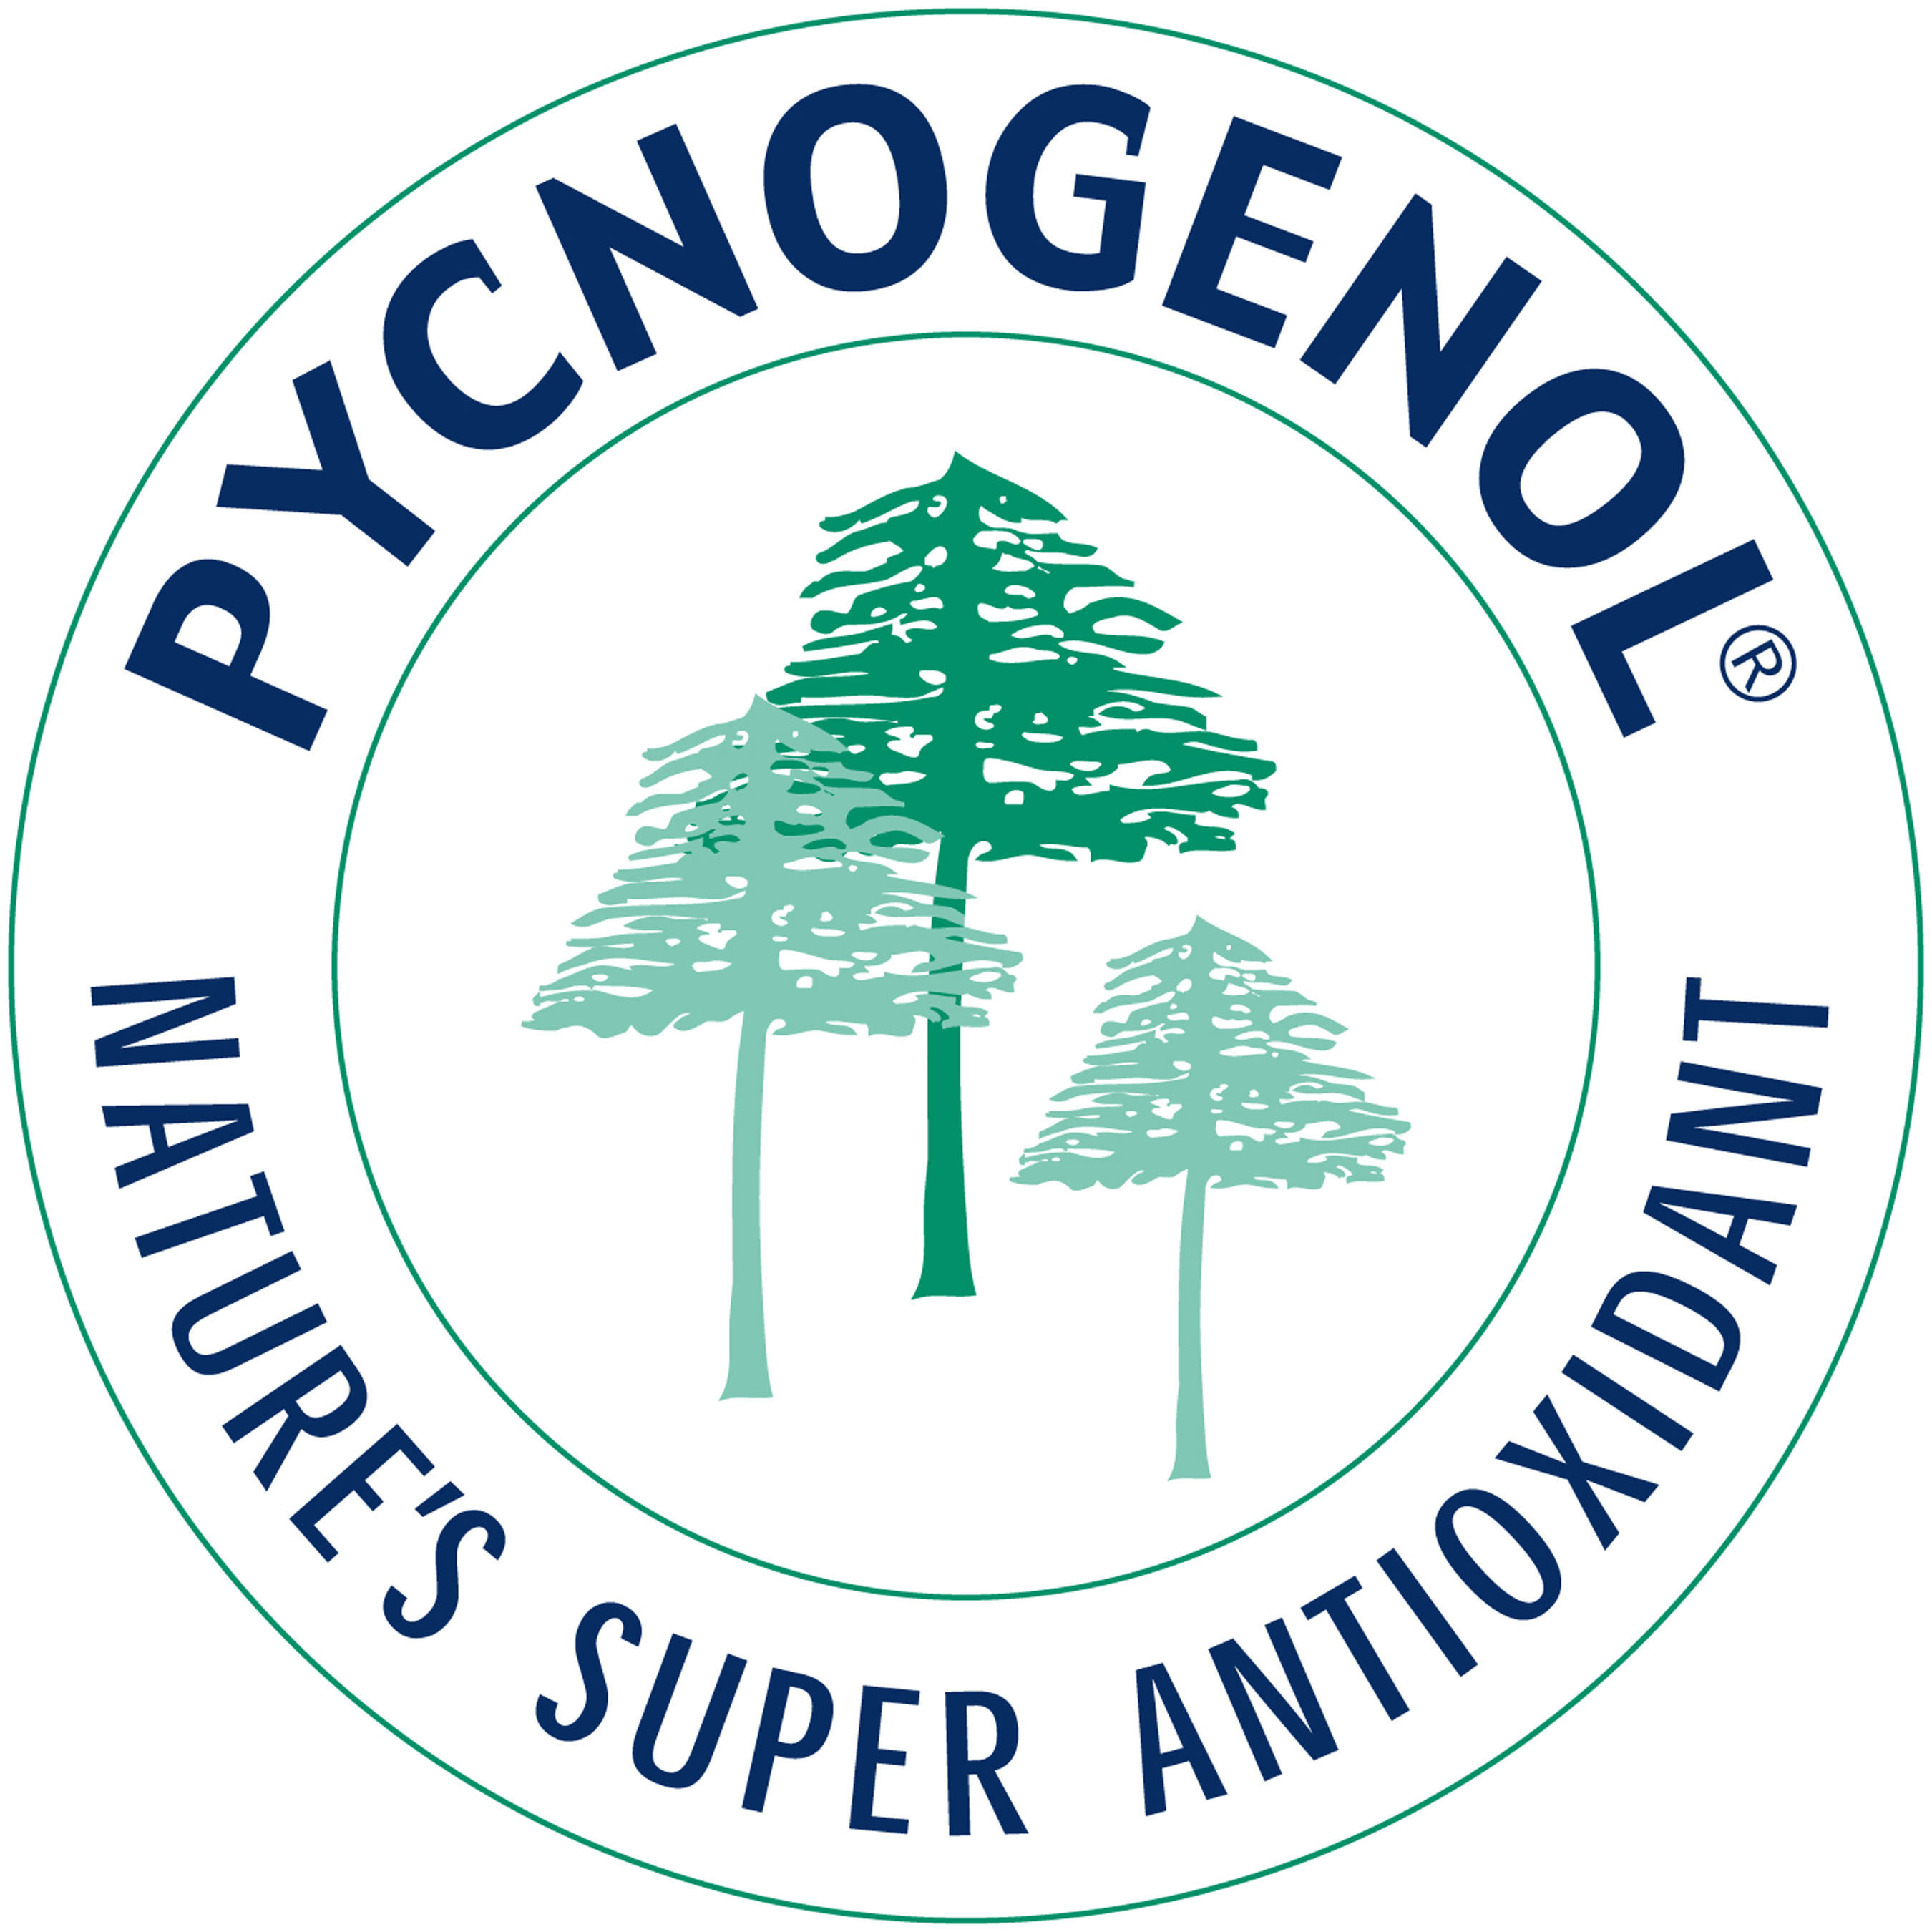 Pycnogenol(R) is a natural plant extract originating from the bark of the maritime pine that grows along the coast of southwest France and is found to contain a unique combination of procyanidins, bioflavonoids and organic acids, which offer extensive natural health benefits. (PRNewsFoto/Horphag Research (USA) Inc.) (PRNewsFoto/)